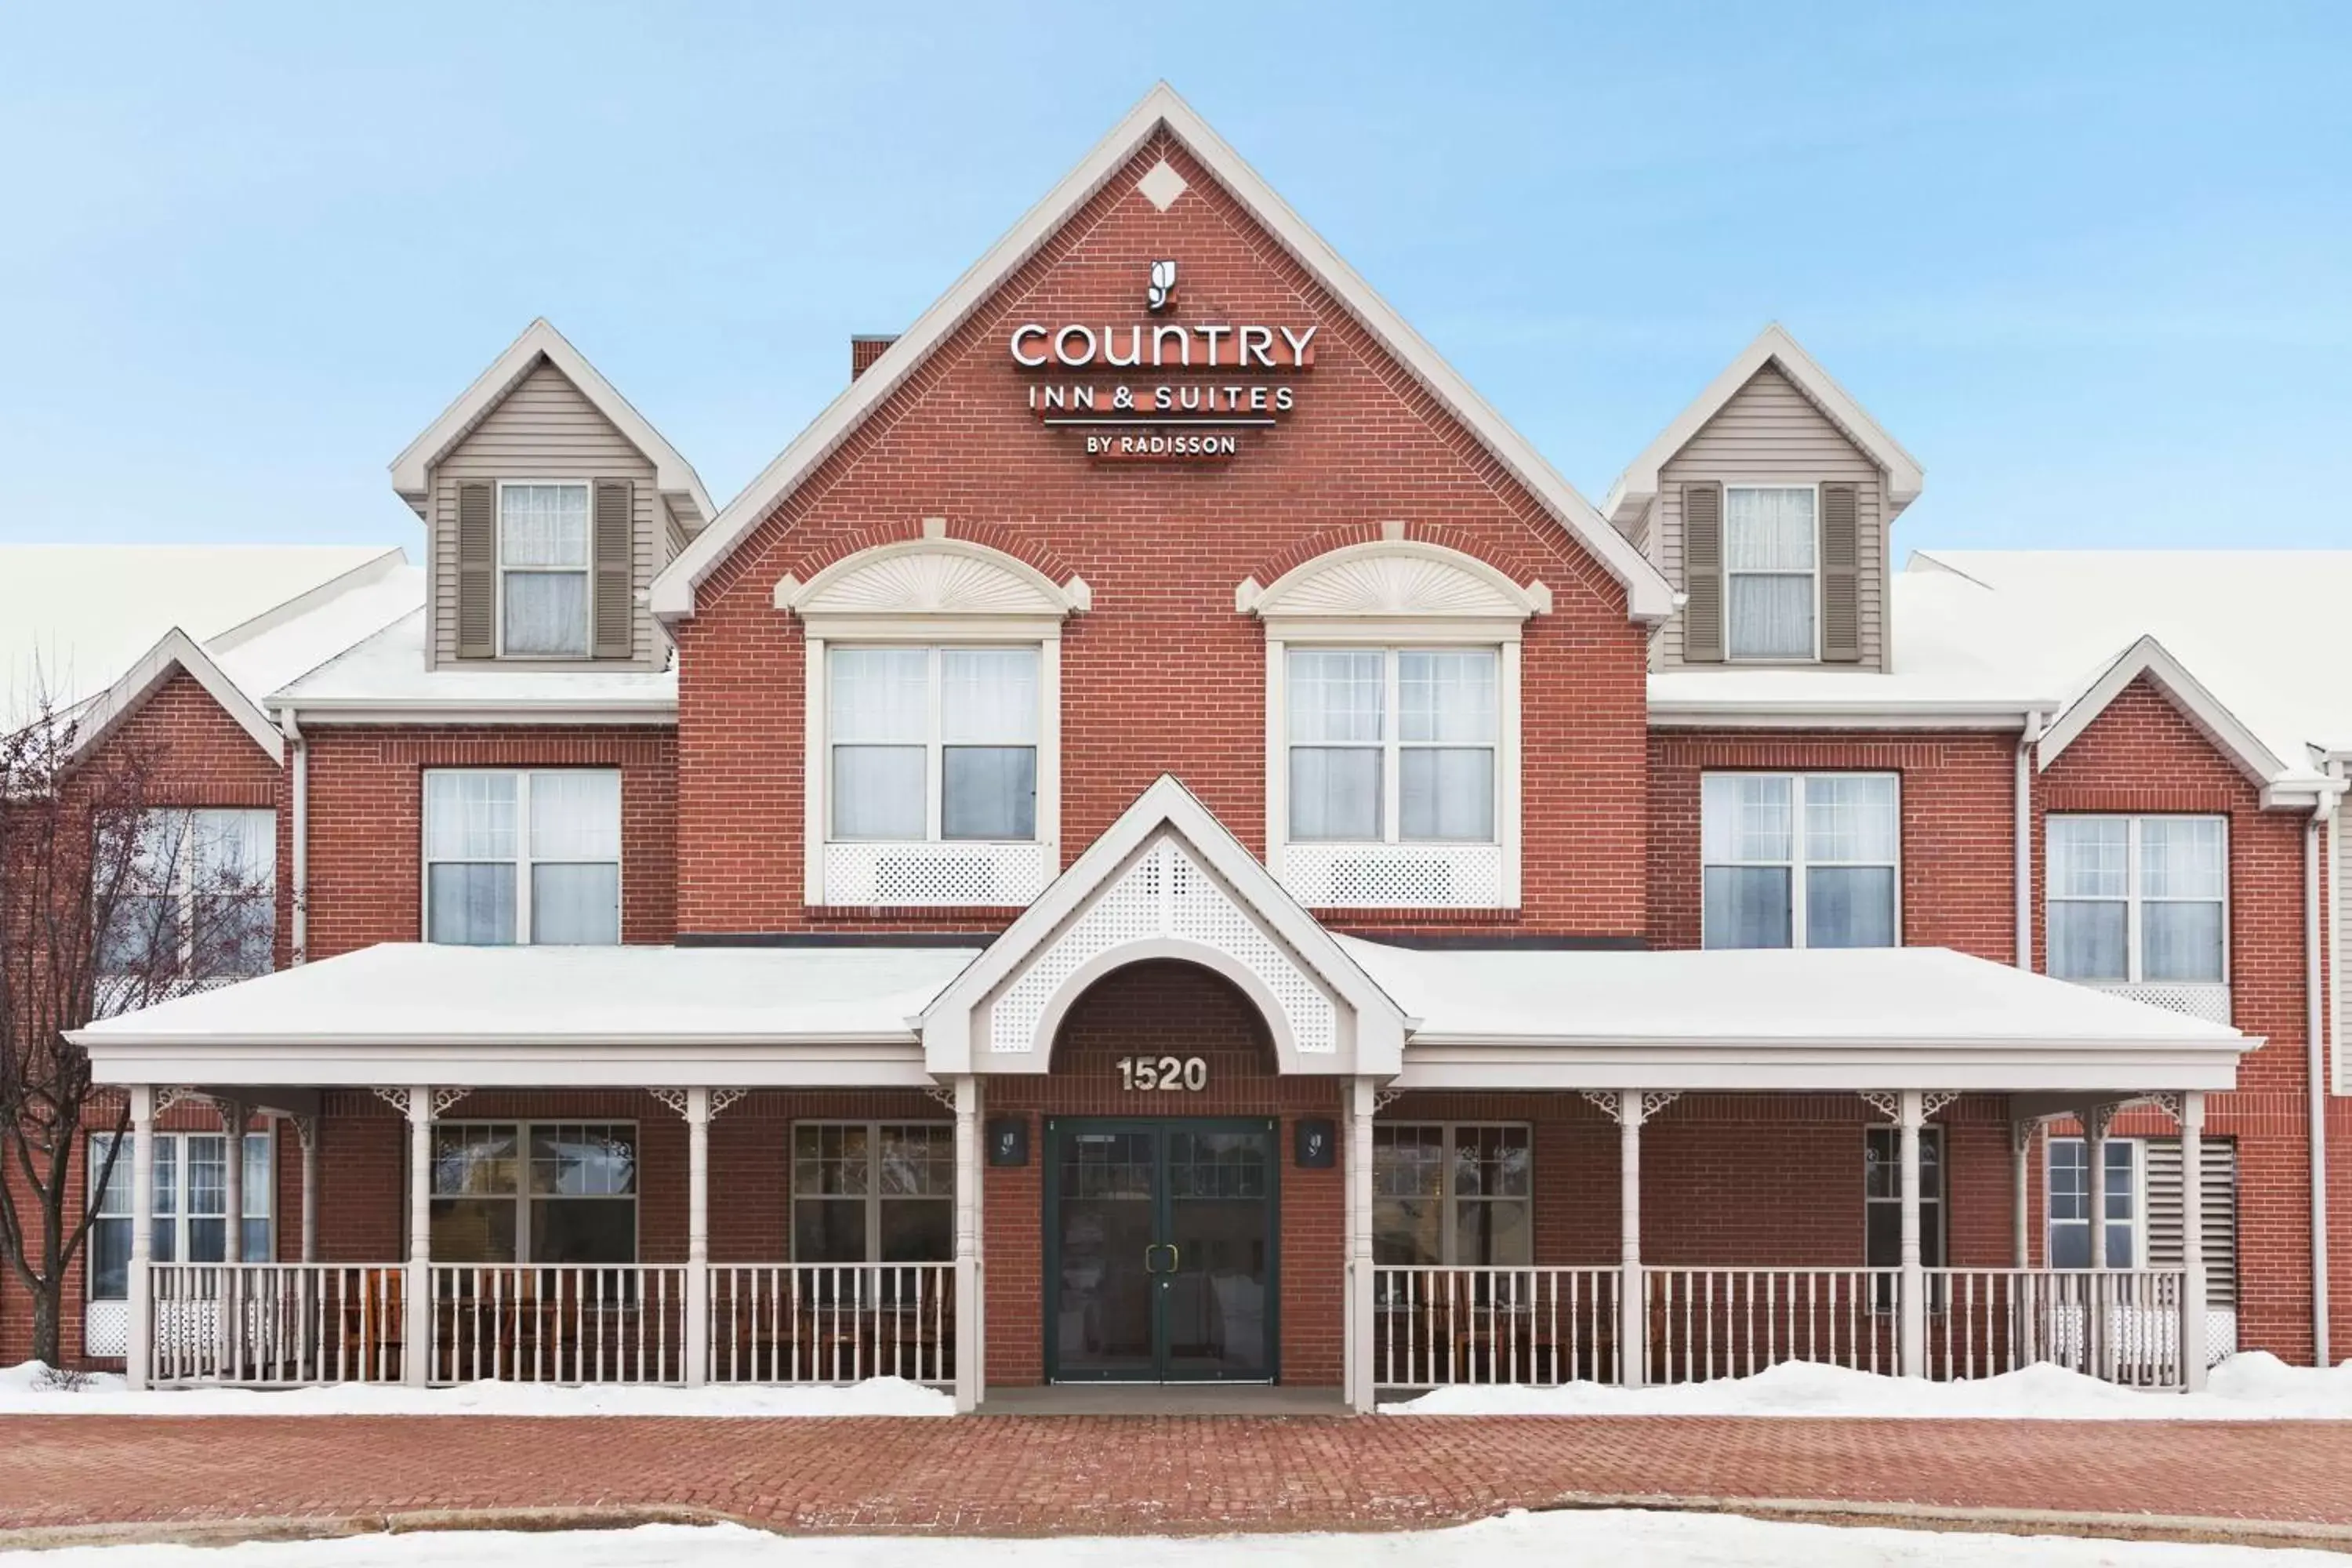 Property building in Country Inn & Suites by Radisson, Wausau, WI